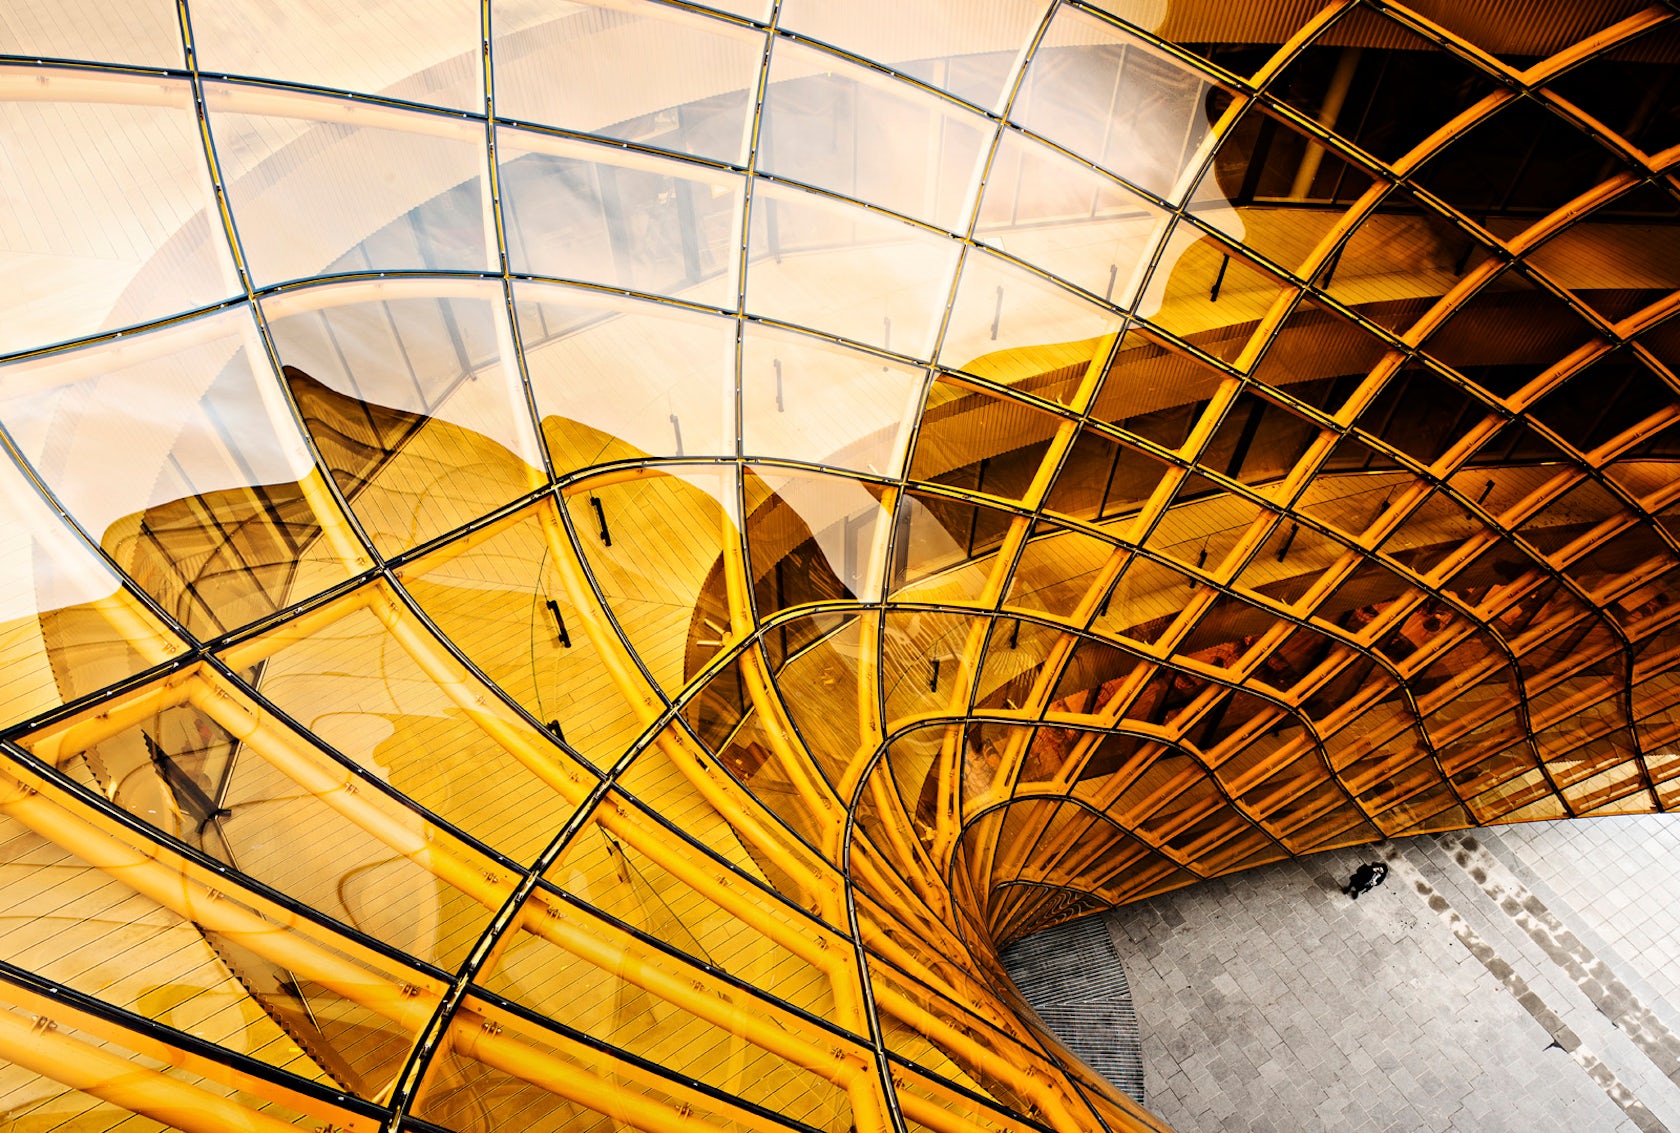 Gallery of Frank Gehry's Fondation Louis Vuitton / Images by Danica O. Kus  - 18